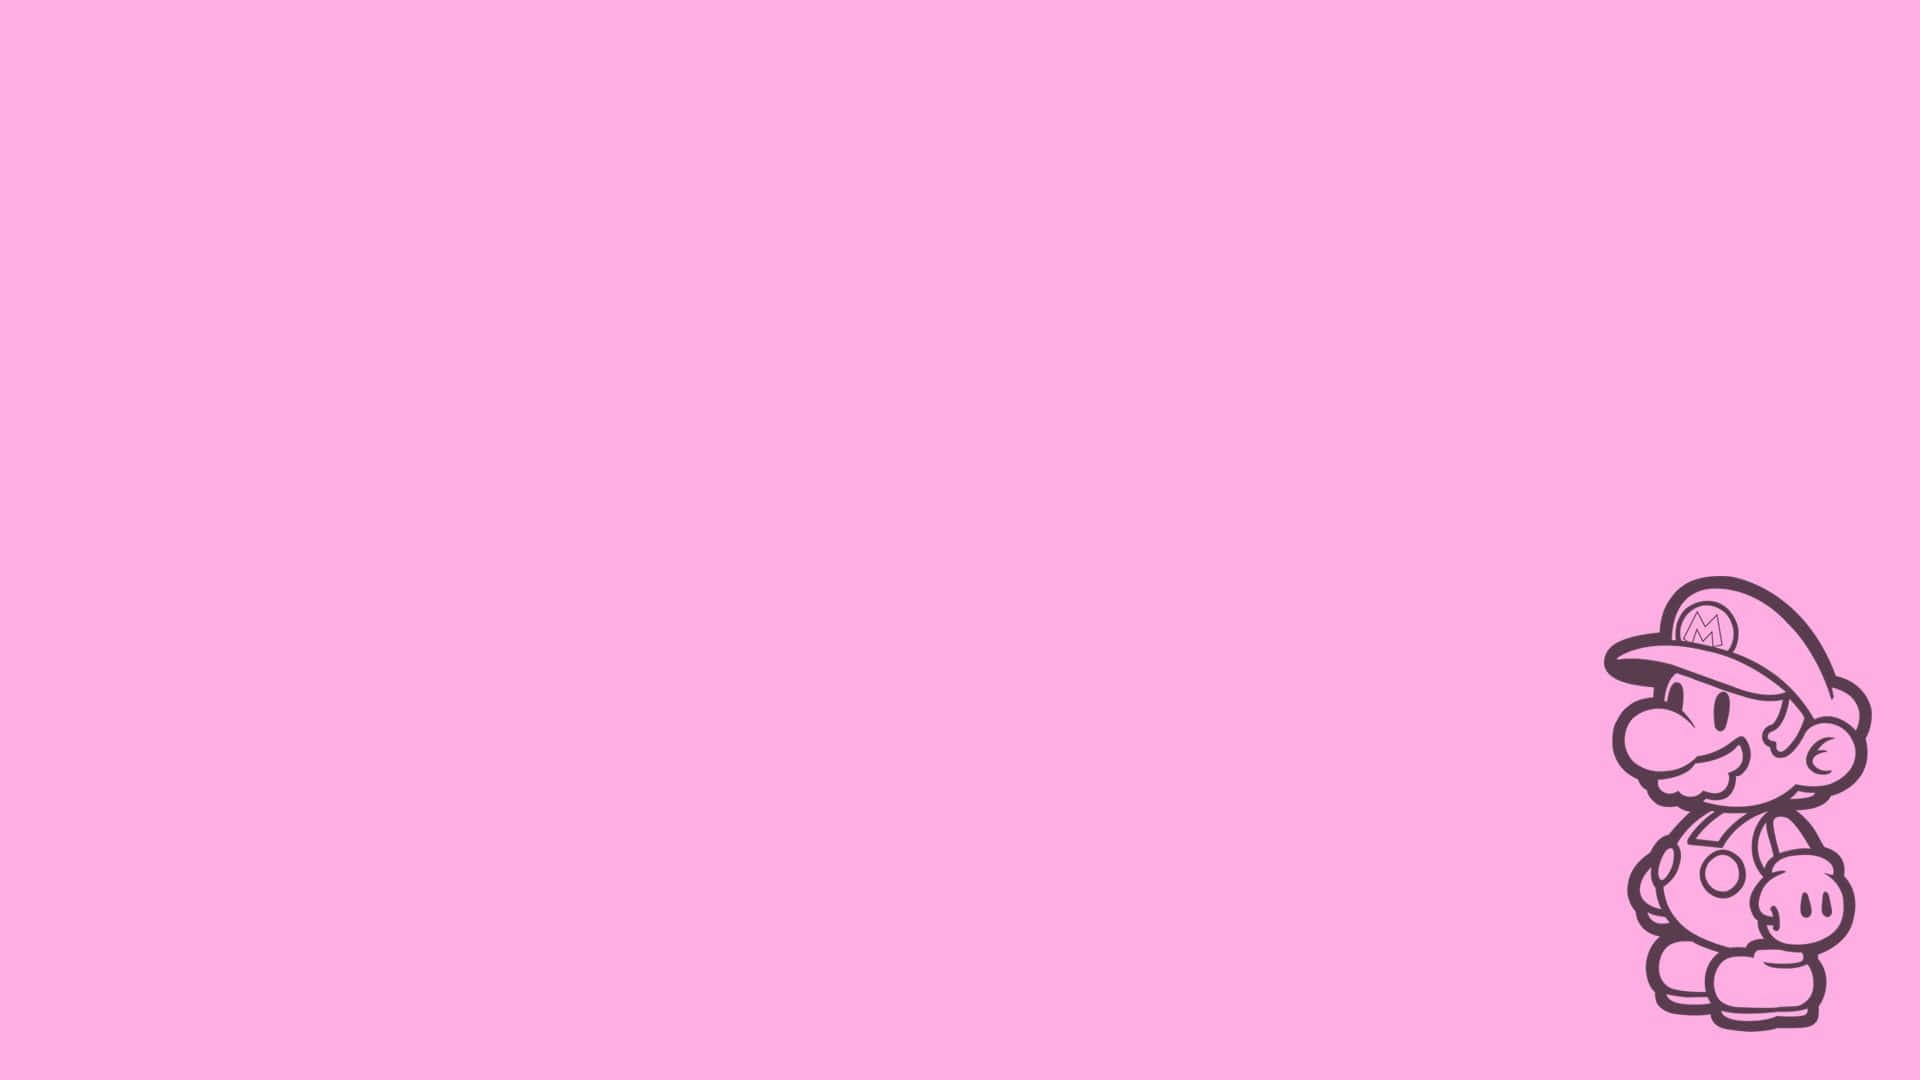 Soft and Beautiful, Simple Pink Wallpaper